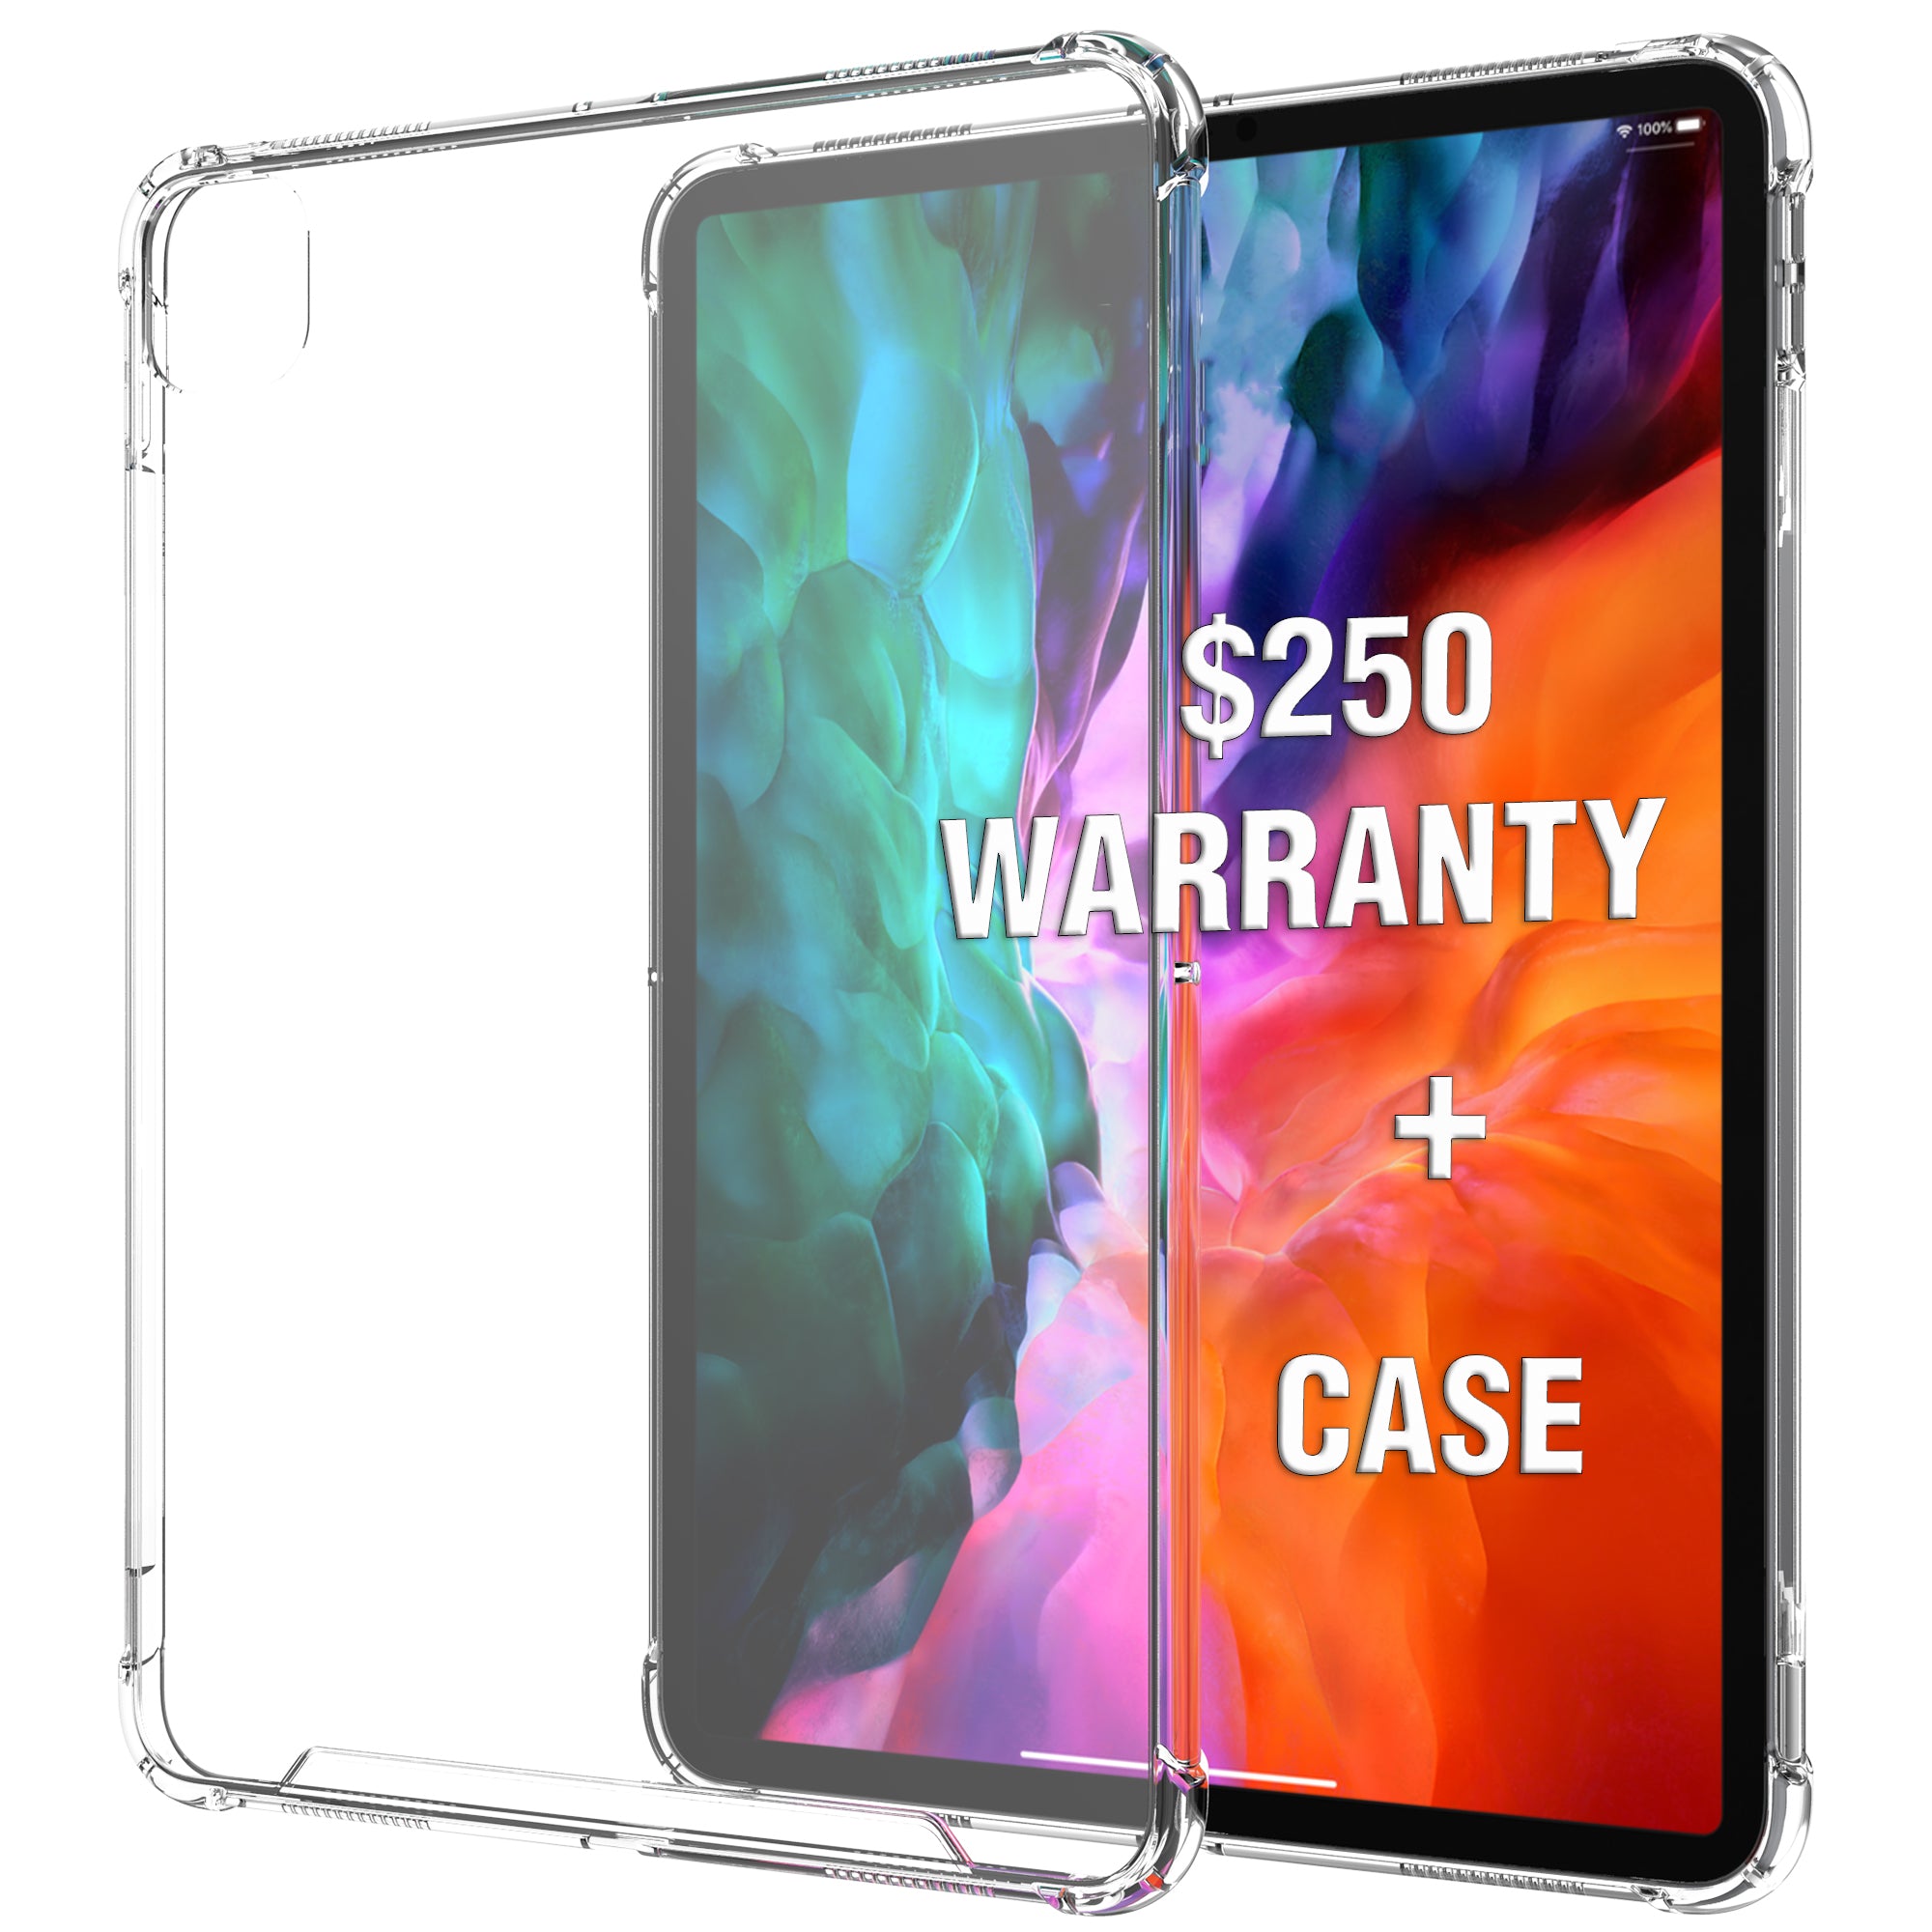 Luvvitt iPad Pro 12.9 Case 2020 Clear View with $250 Screen Replacement Warranty